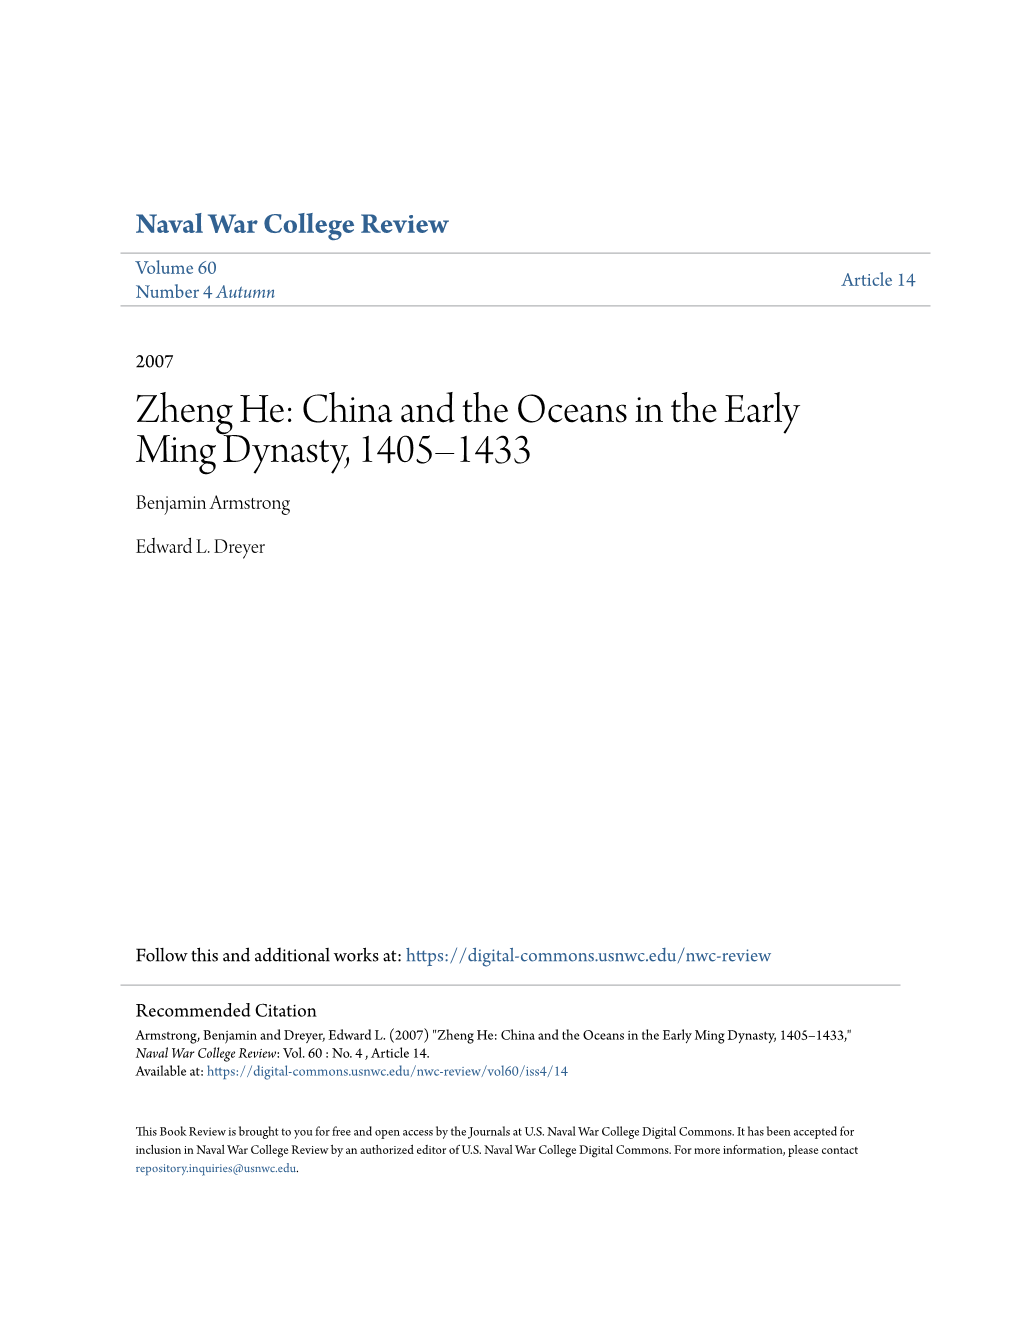 Zheng He: China and the Oceans in the Early Ming Dynasty, 1405–1433 Benjamin Armstrong